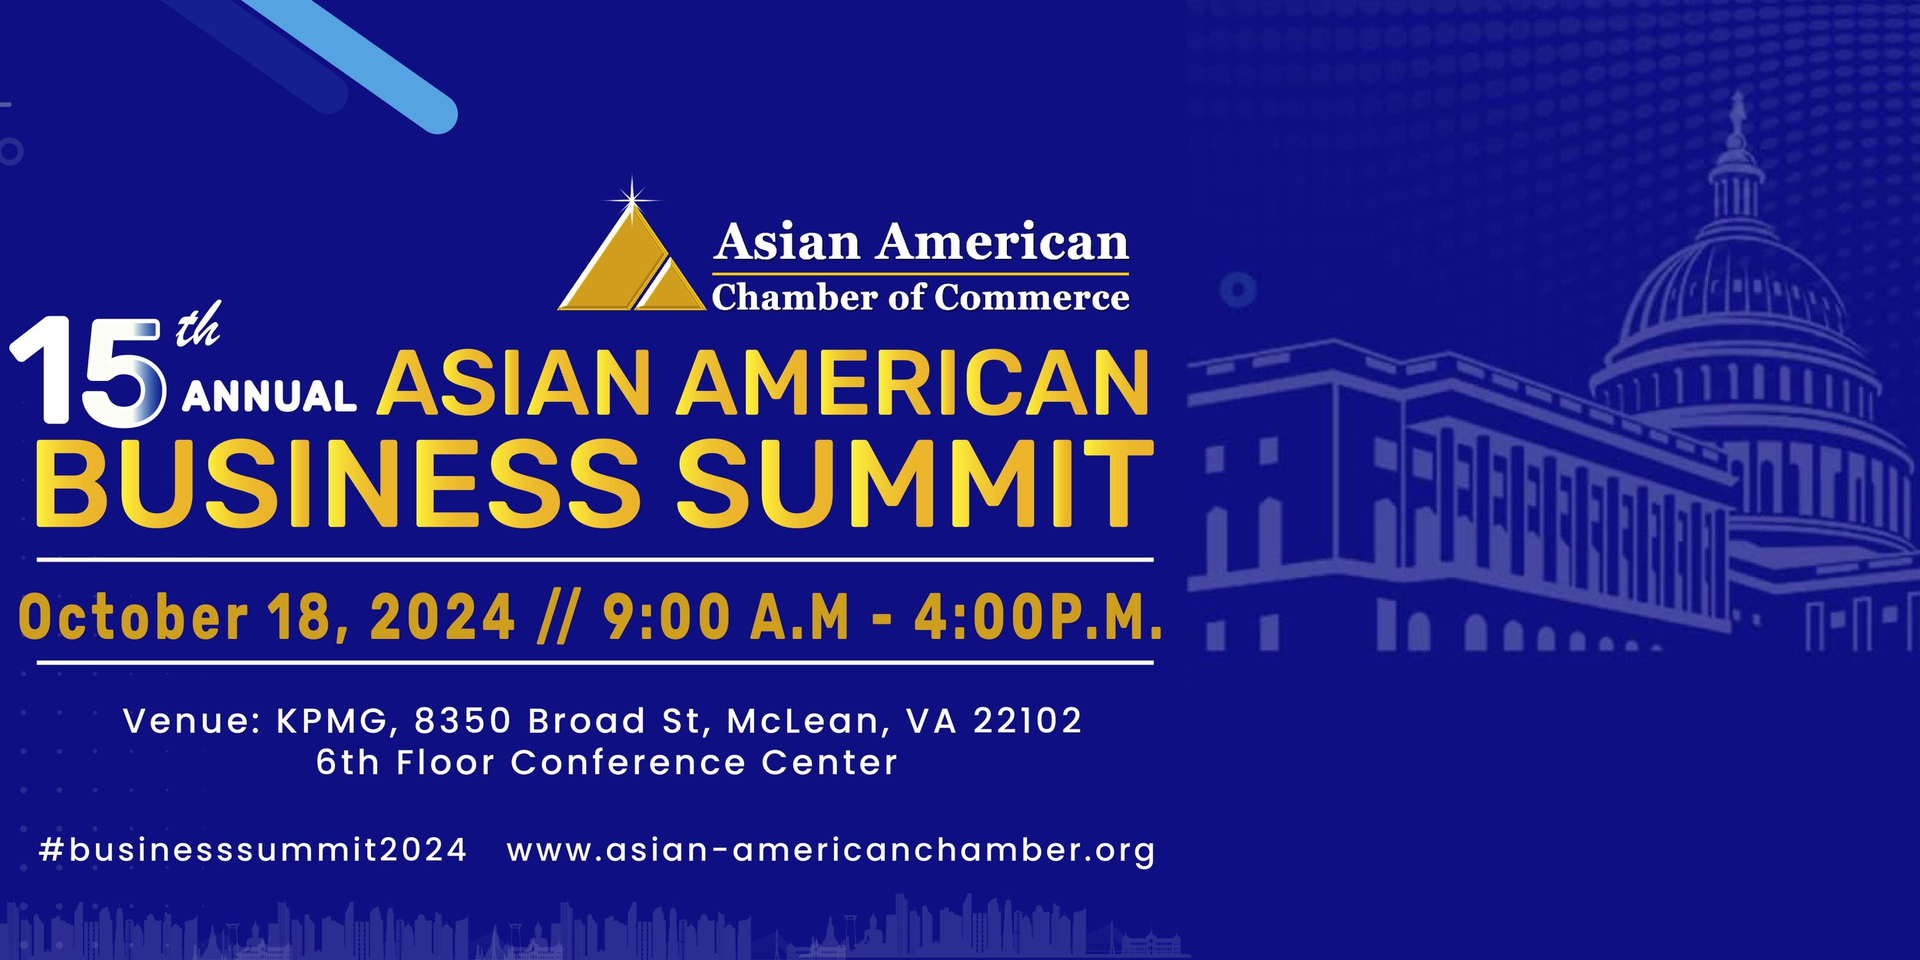 thumbnails Asian American Business Summit & Expo